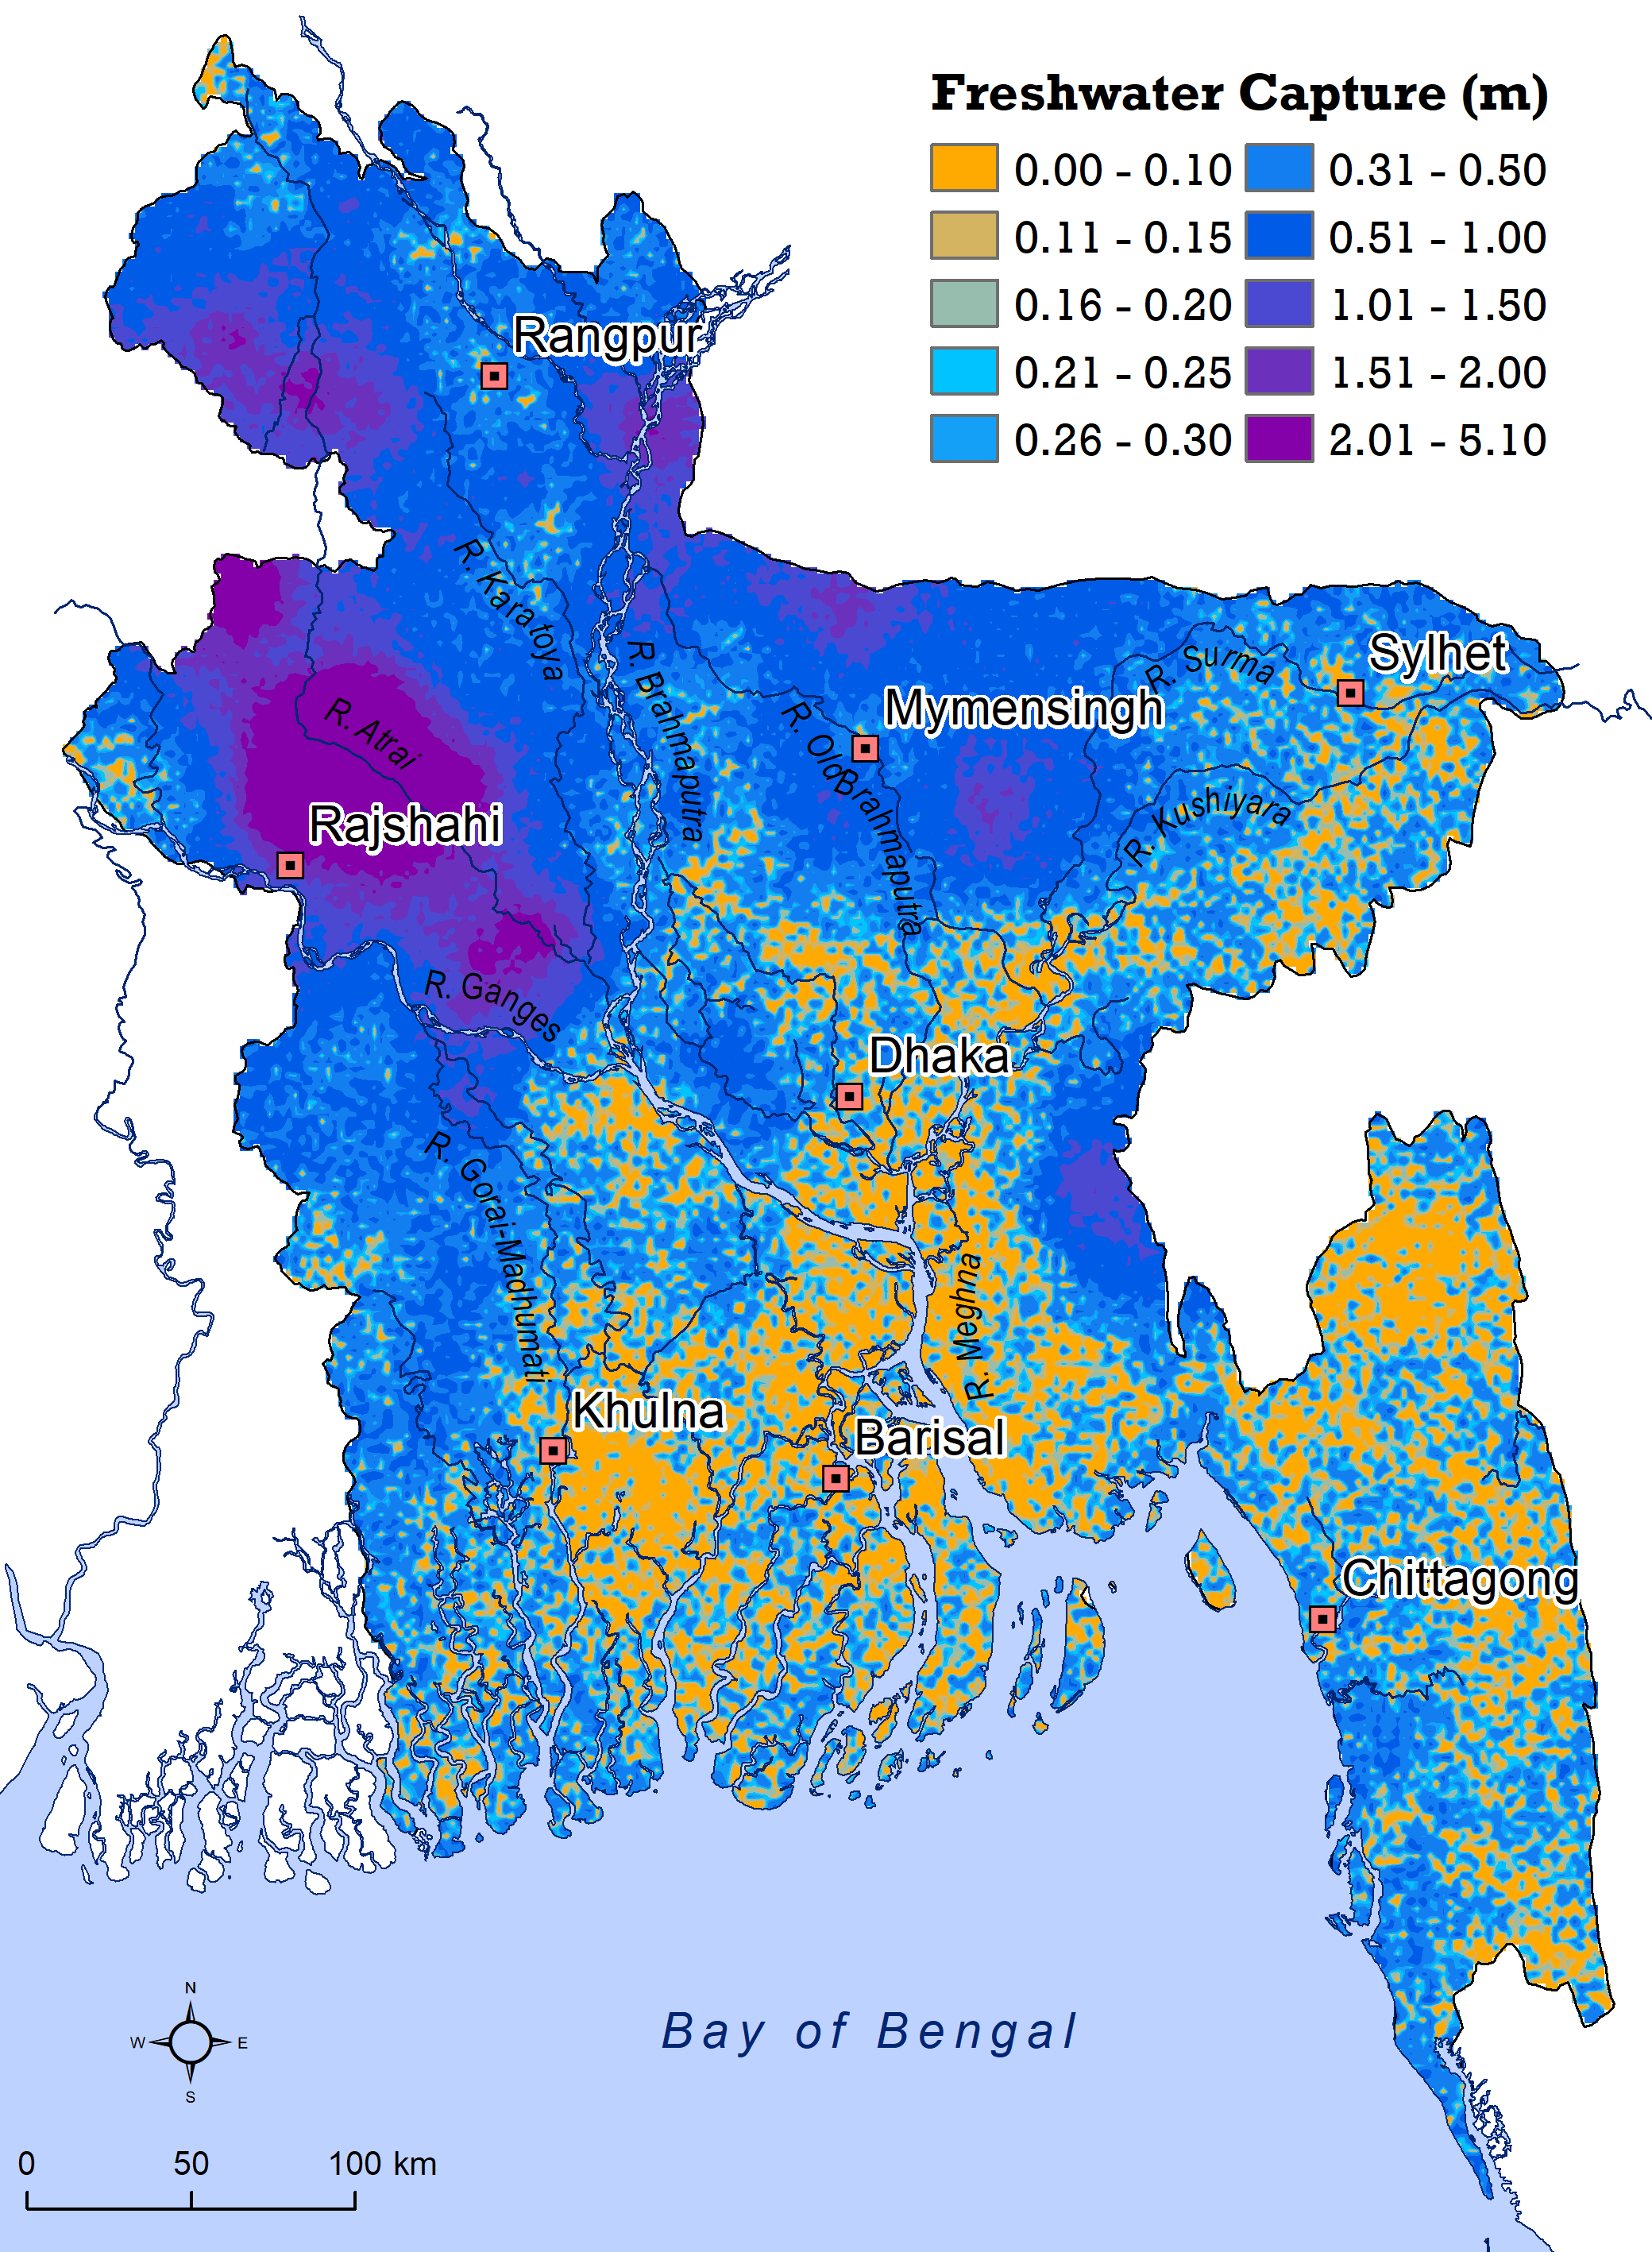 a map of bangladesh, using lighter and darker colors to indicate amount of freshwater capture in the region. the city of rajshahi captured the most, while barisal captured the least